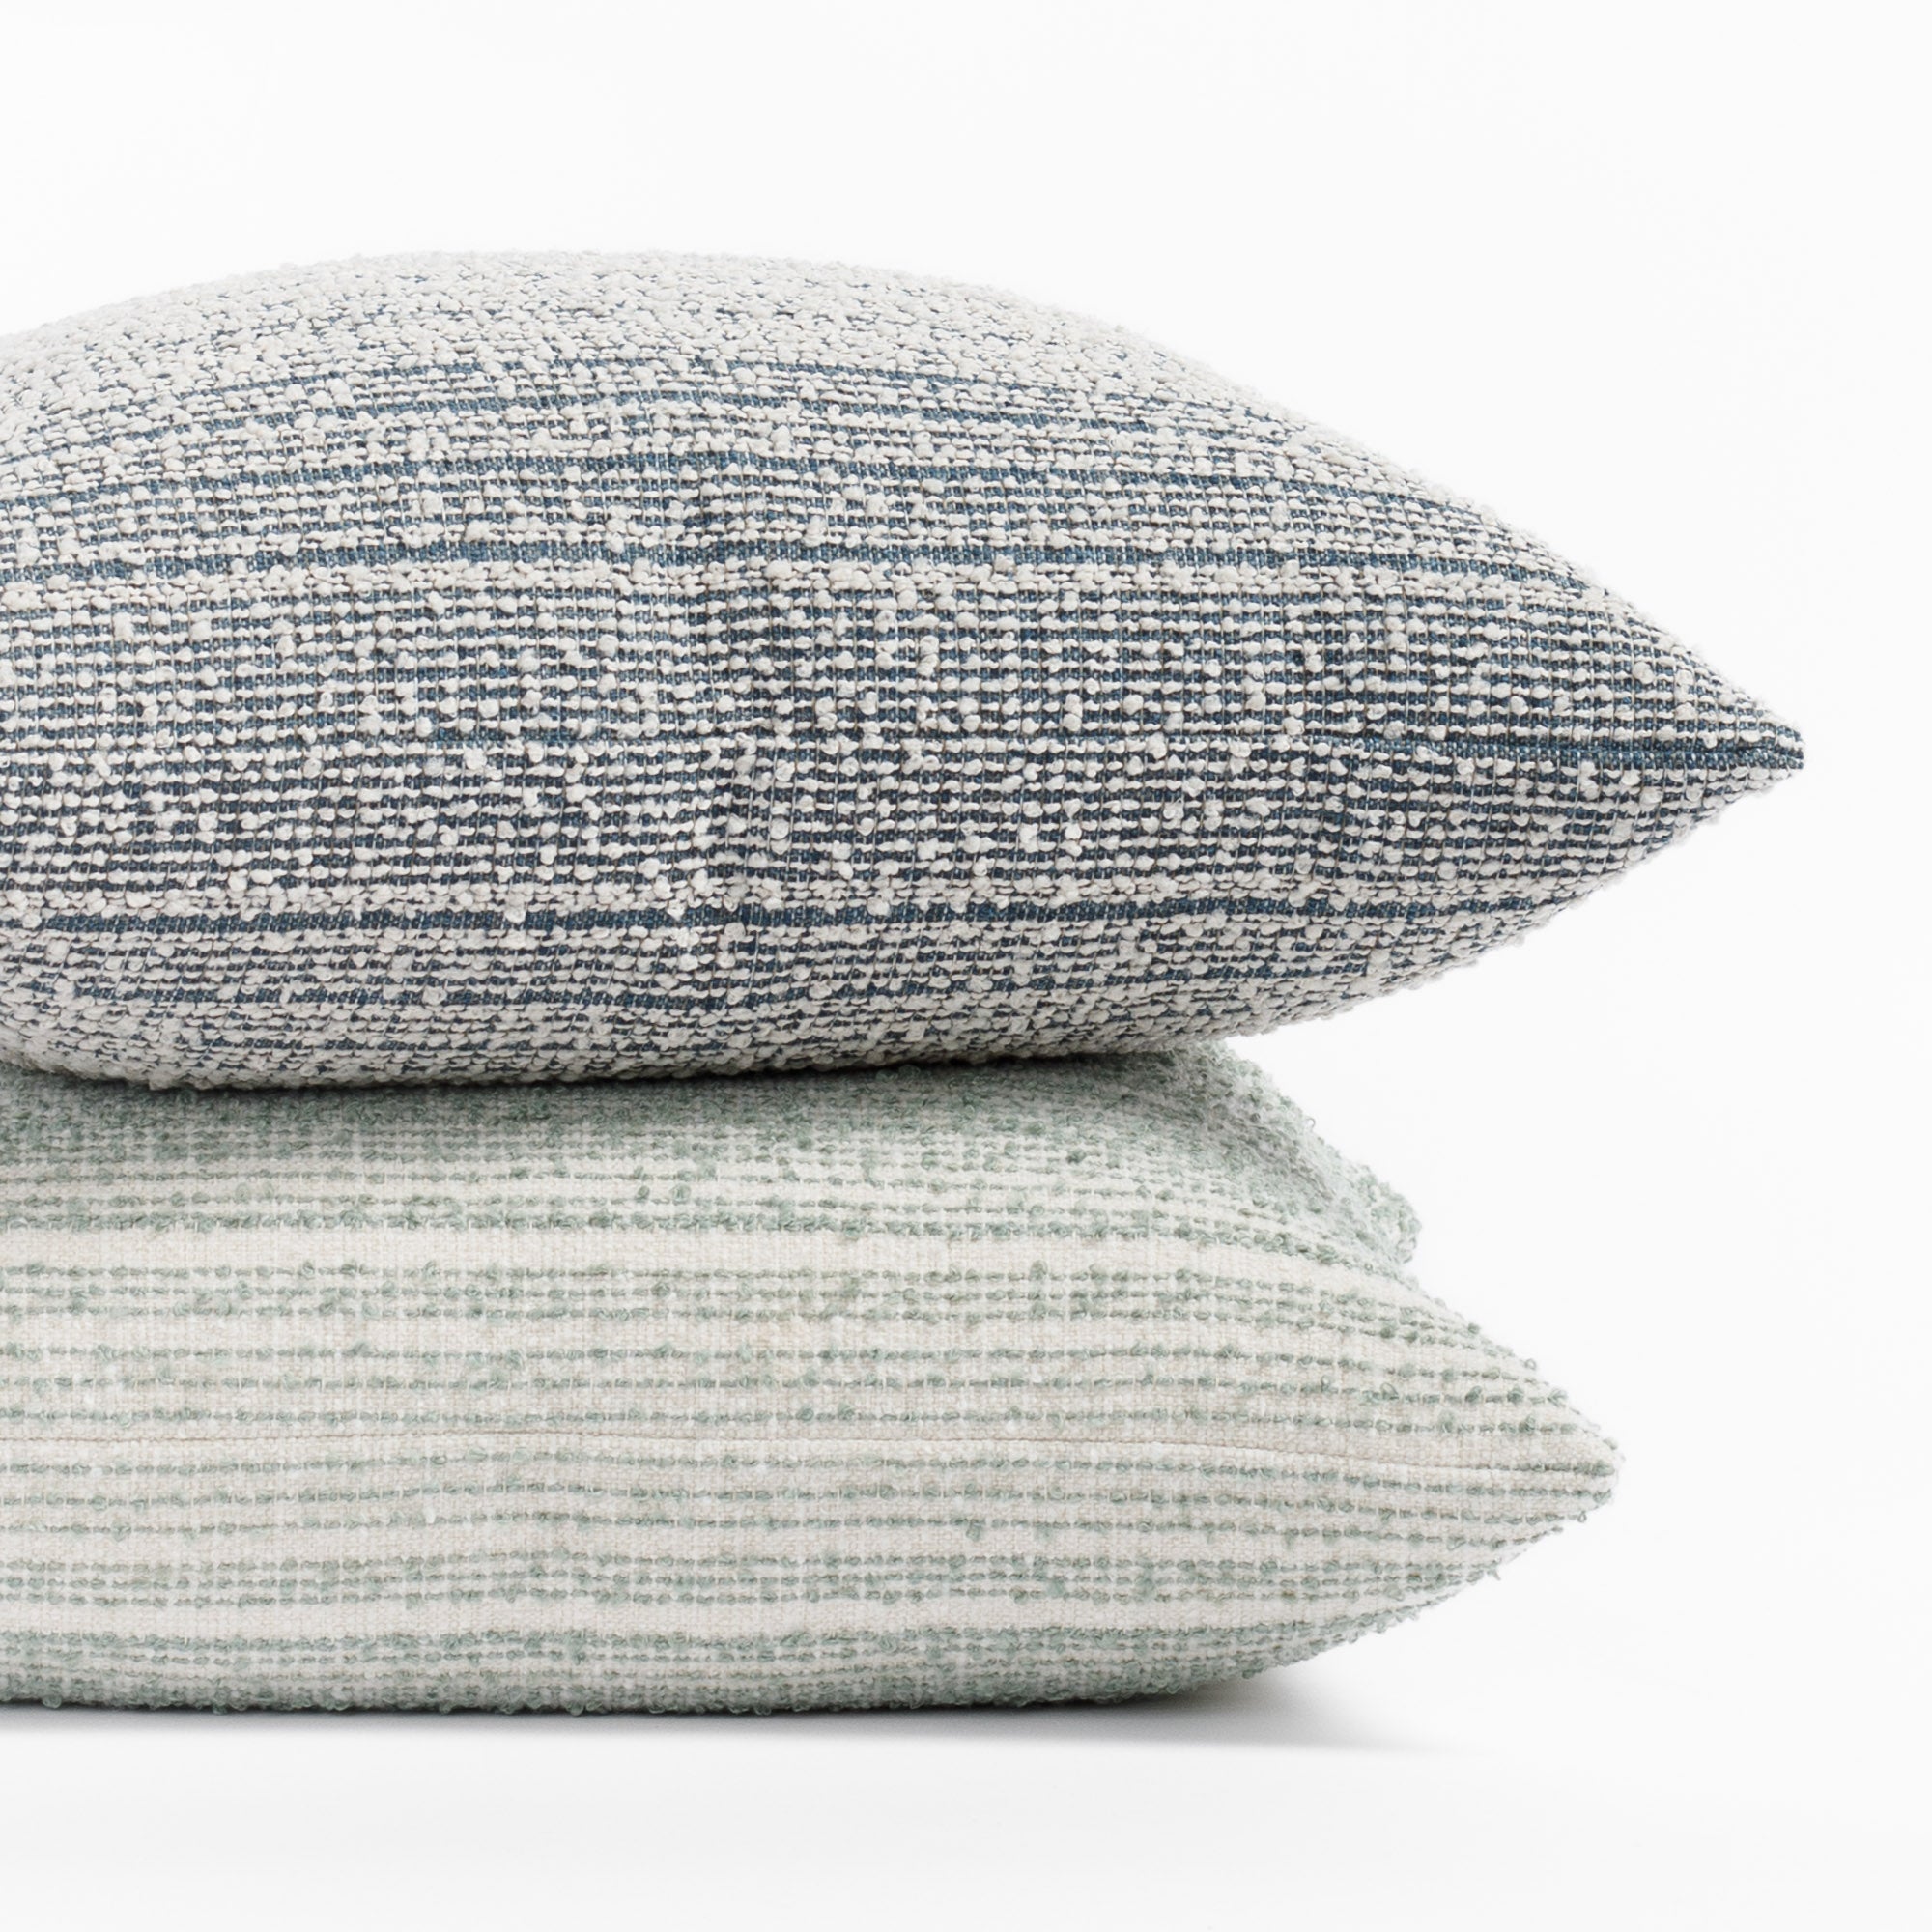 Kos Stripe throw pillows in Chambray Blue and Jade green from Tonic Living